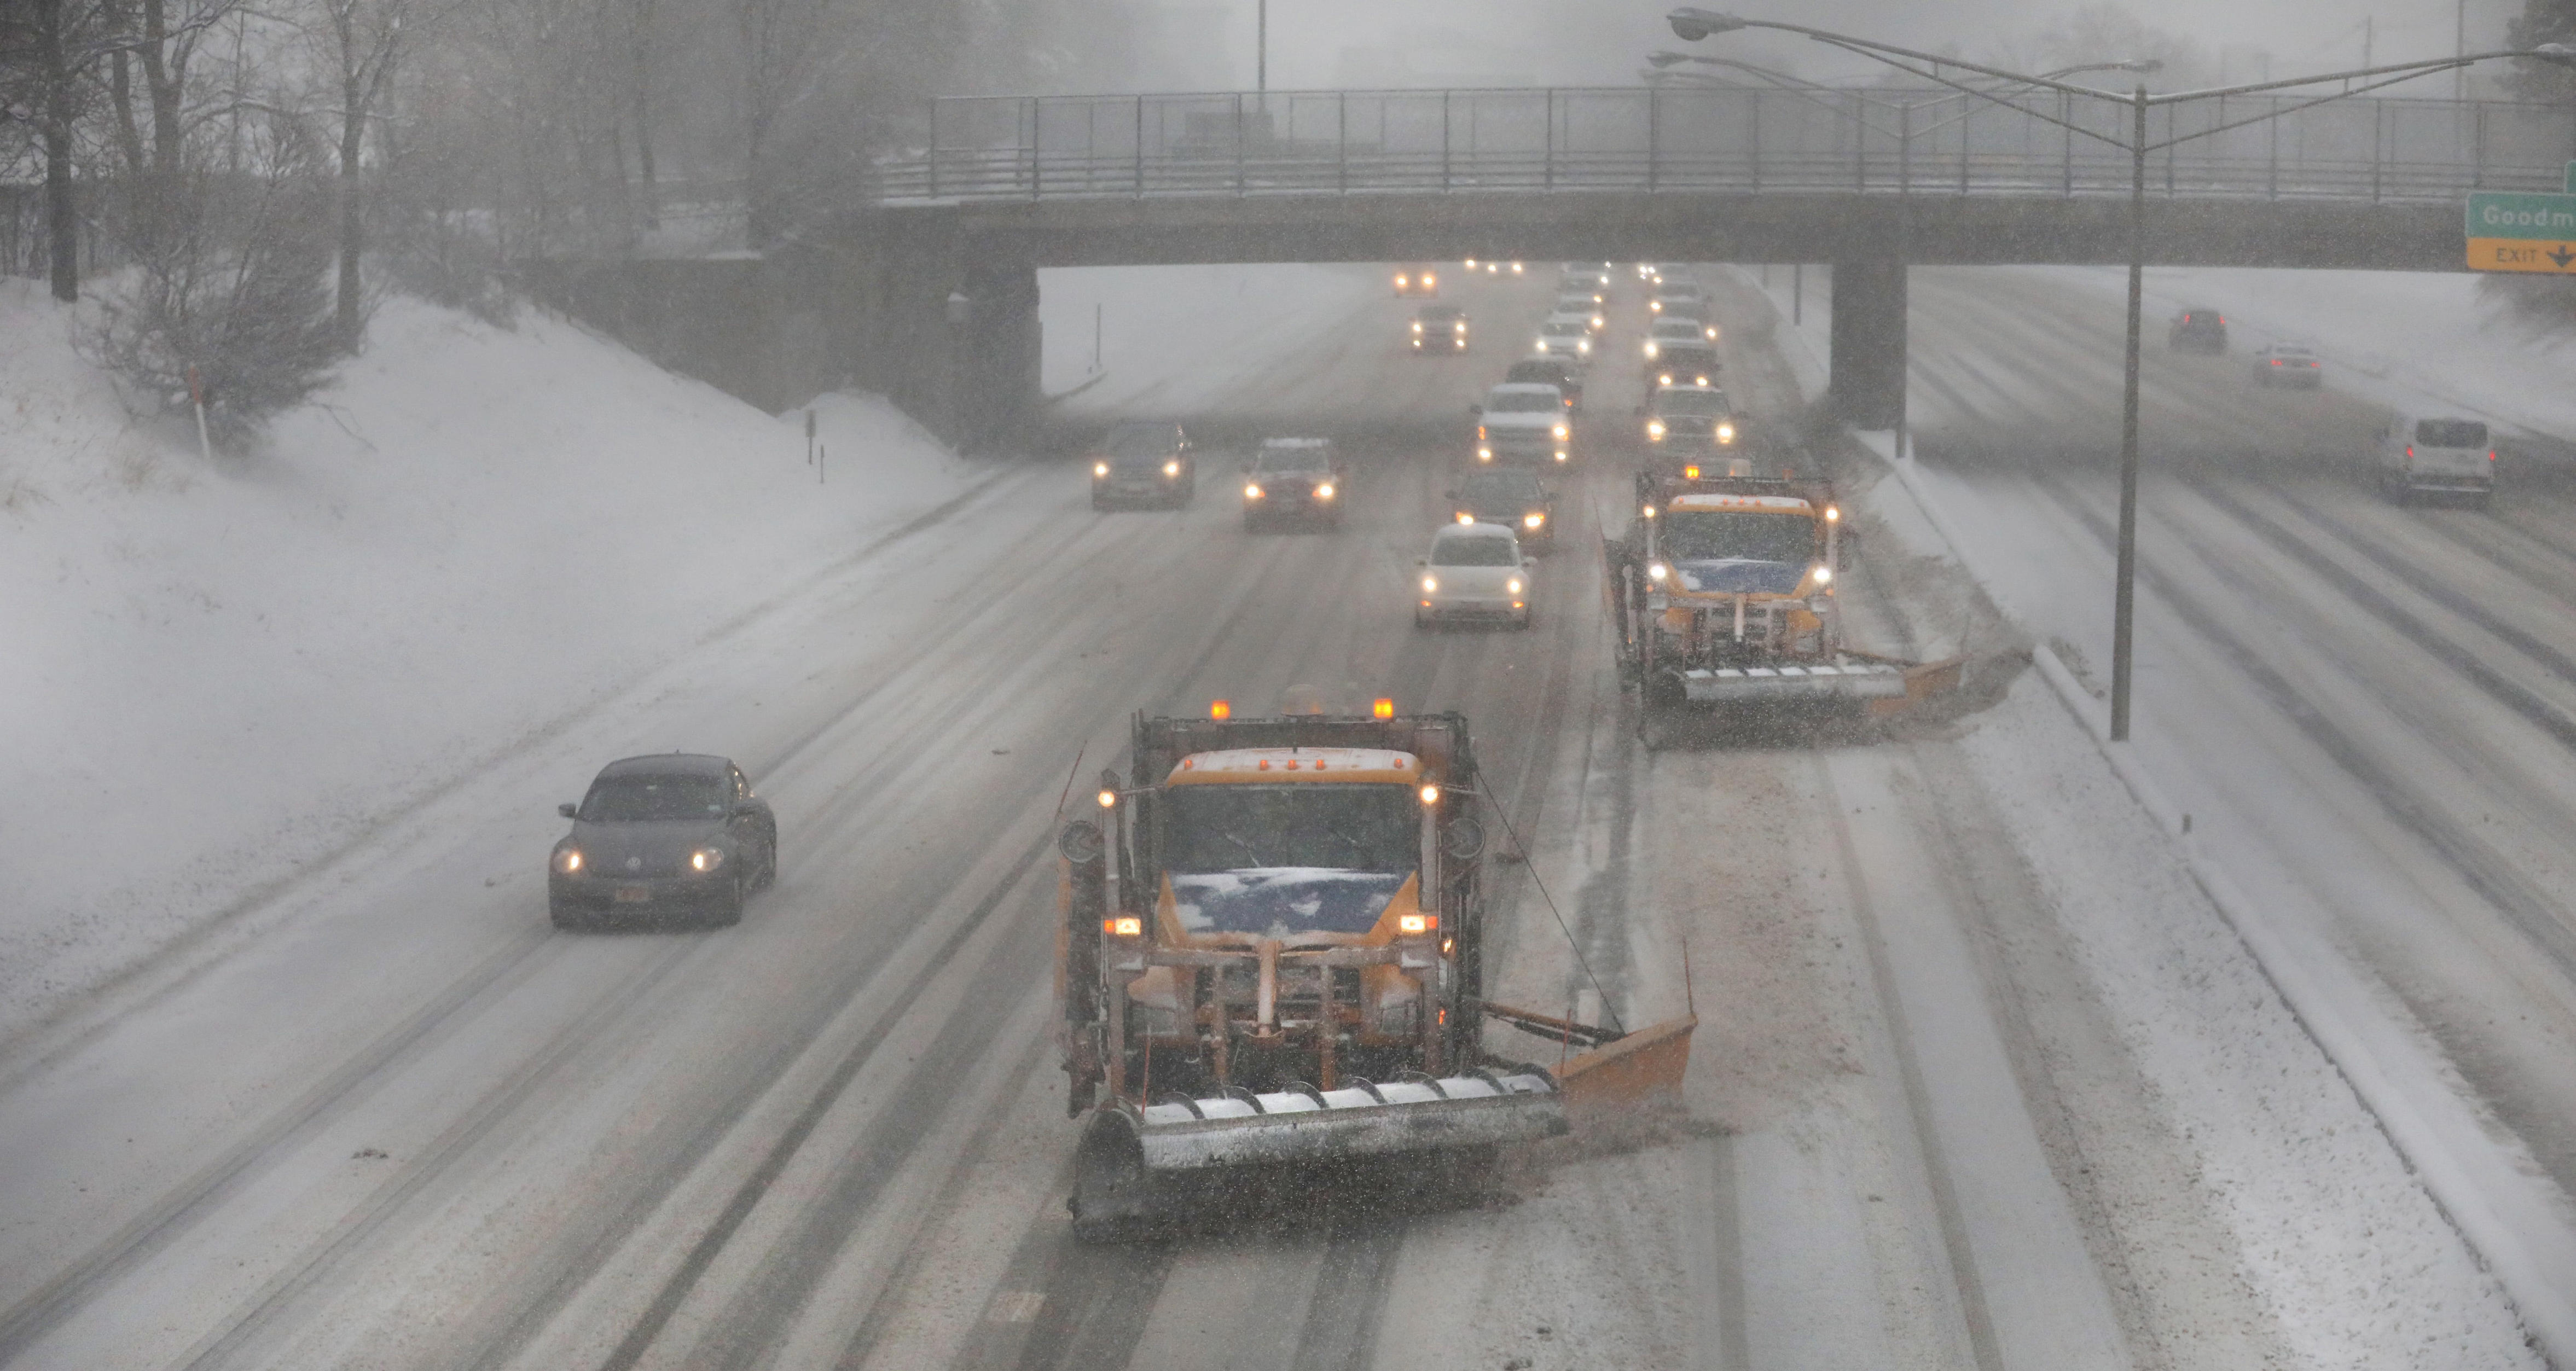 winter storm warning issued for parts of rochester region. how much snow could some areas get?